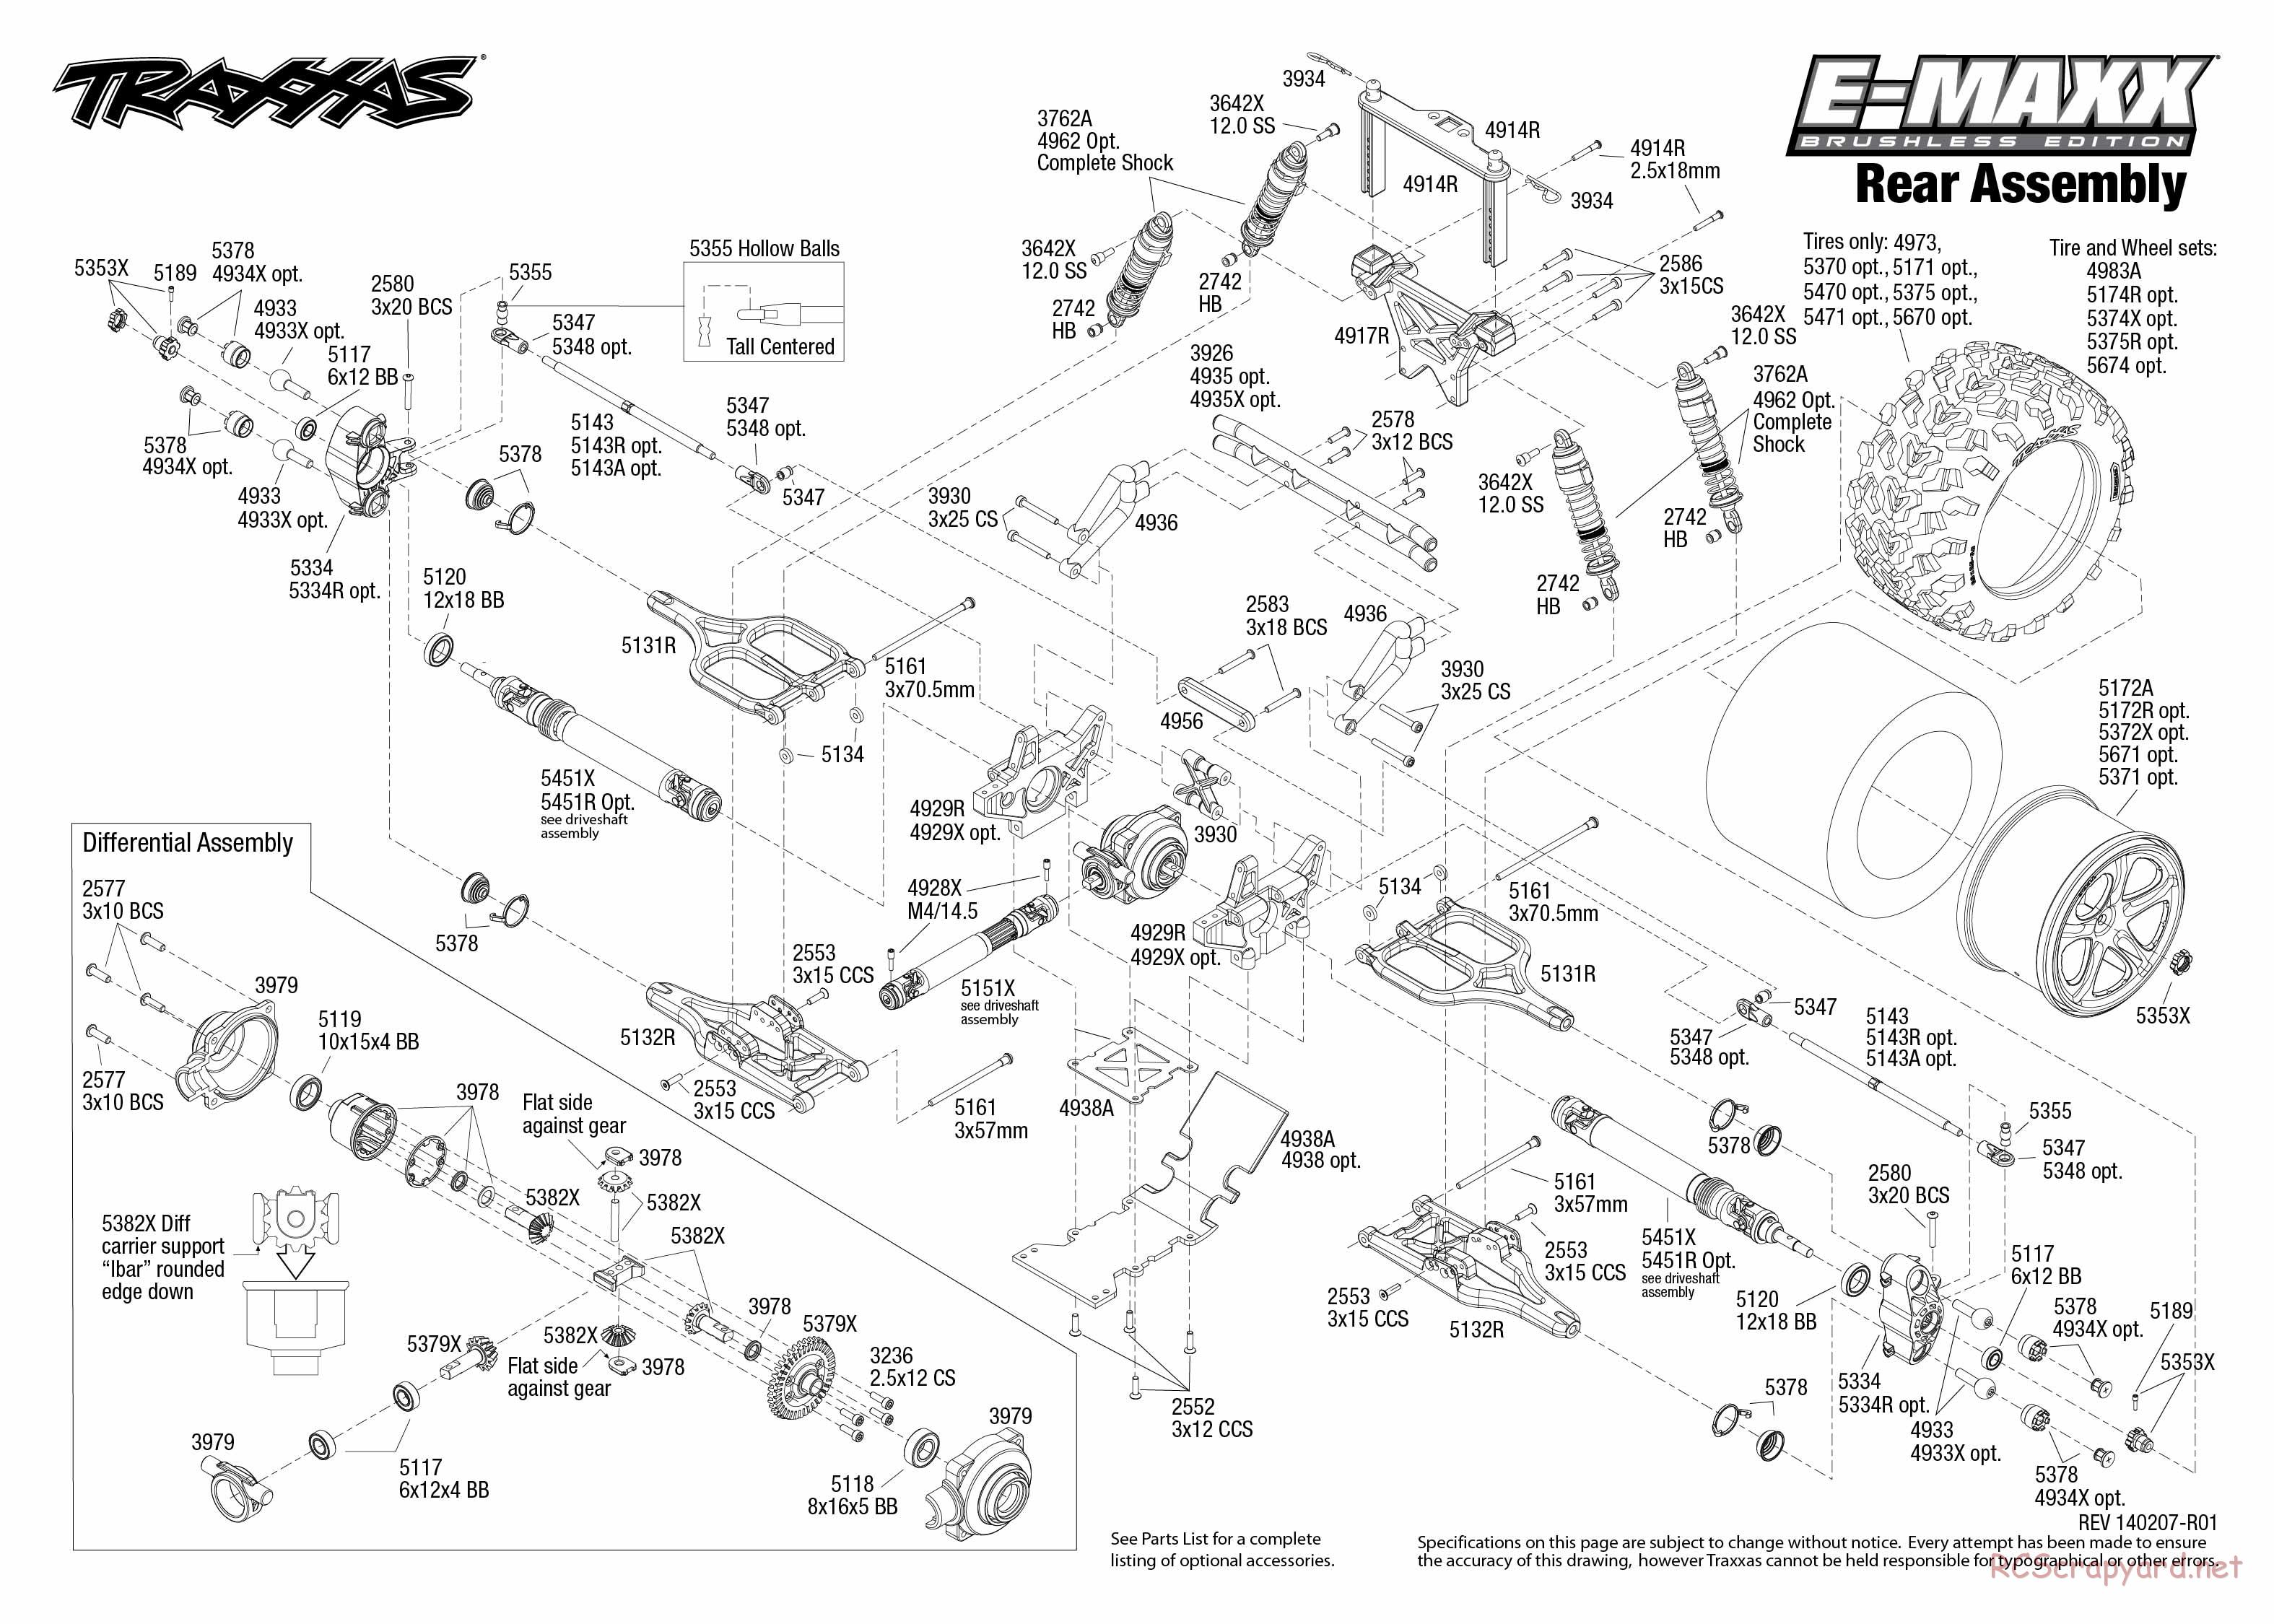 Traxxas - E-Maxx Brushless (2014) - Exploded Views - Page 3